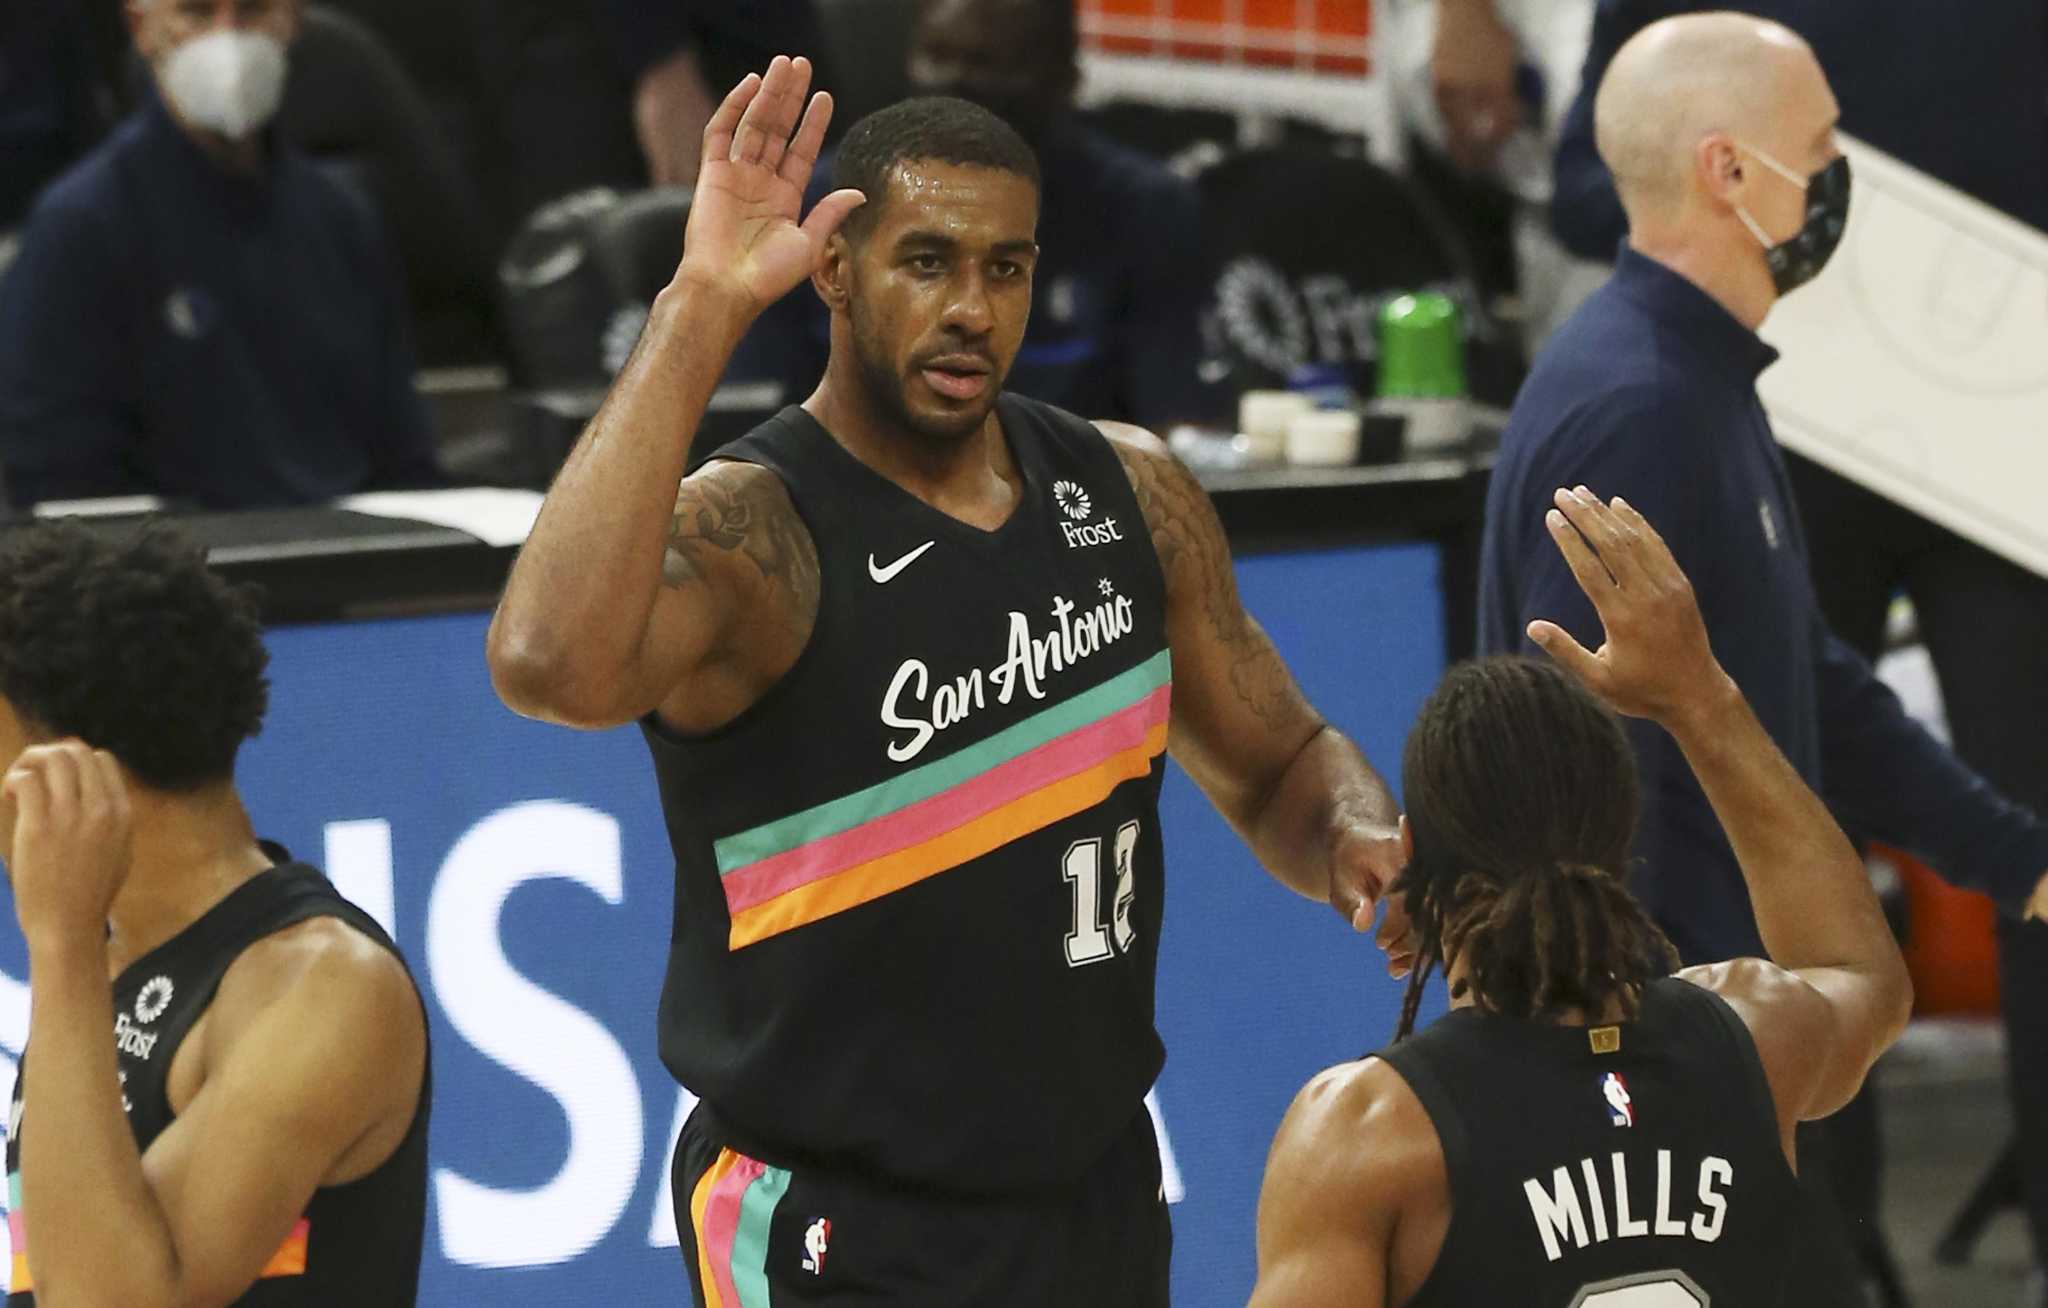 LaMarcus Aldridge open to long-term deal with Trail Blazers 